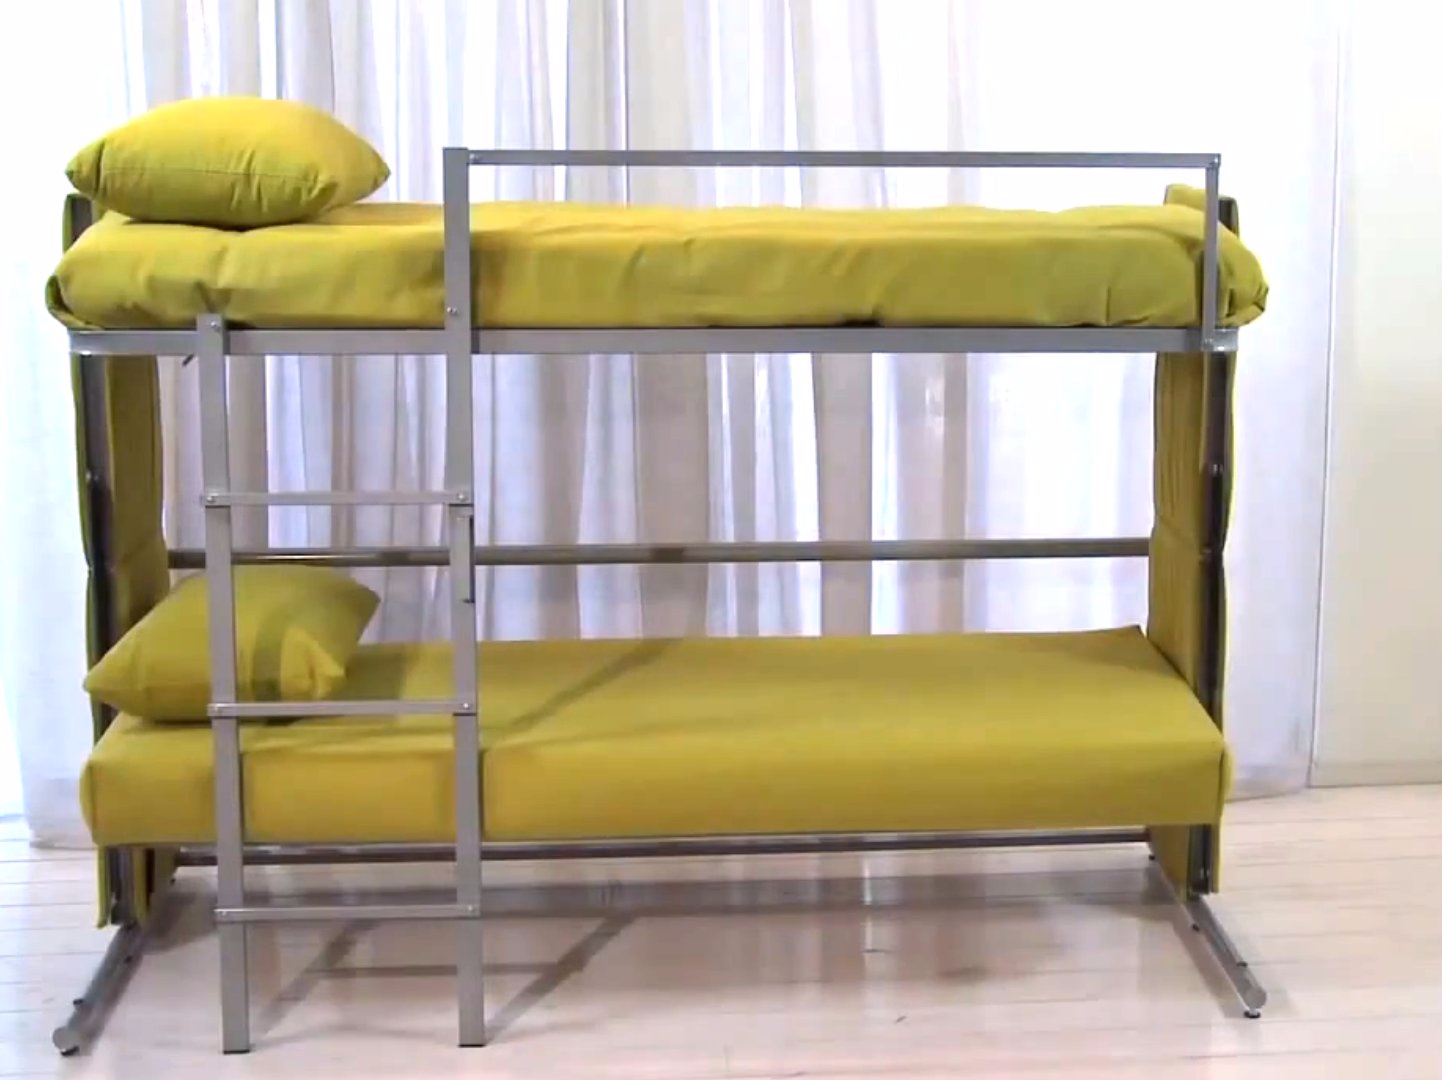 Sofa bunk bed sofa folds out to bunk bed - Business Insider VBGECGZ